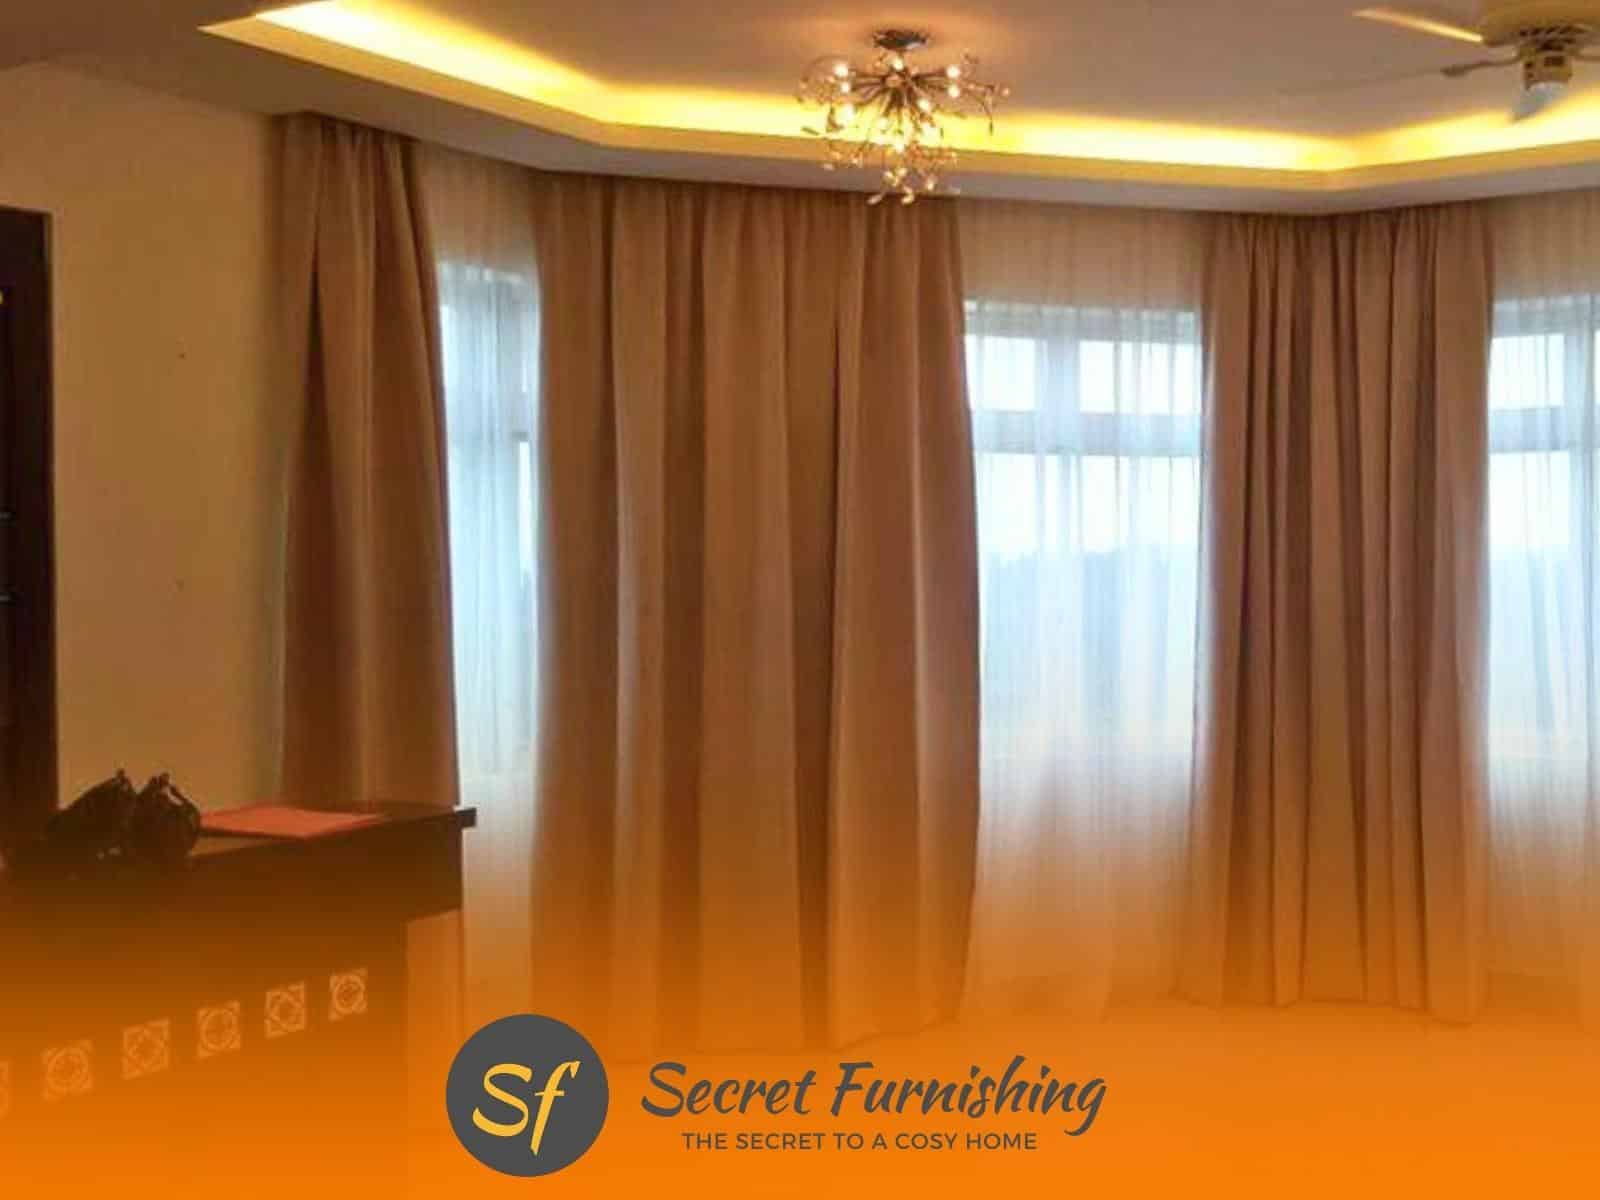 Curtain hardware and installation in SG